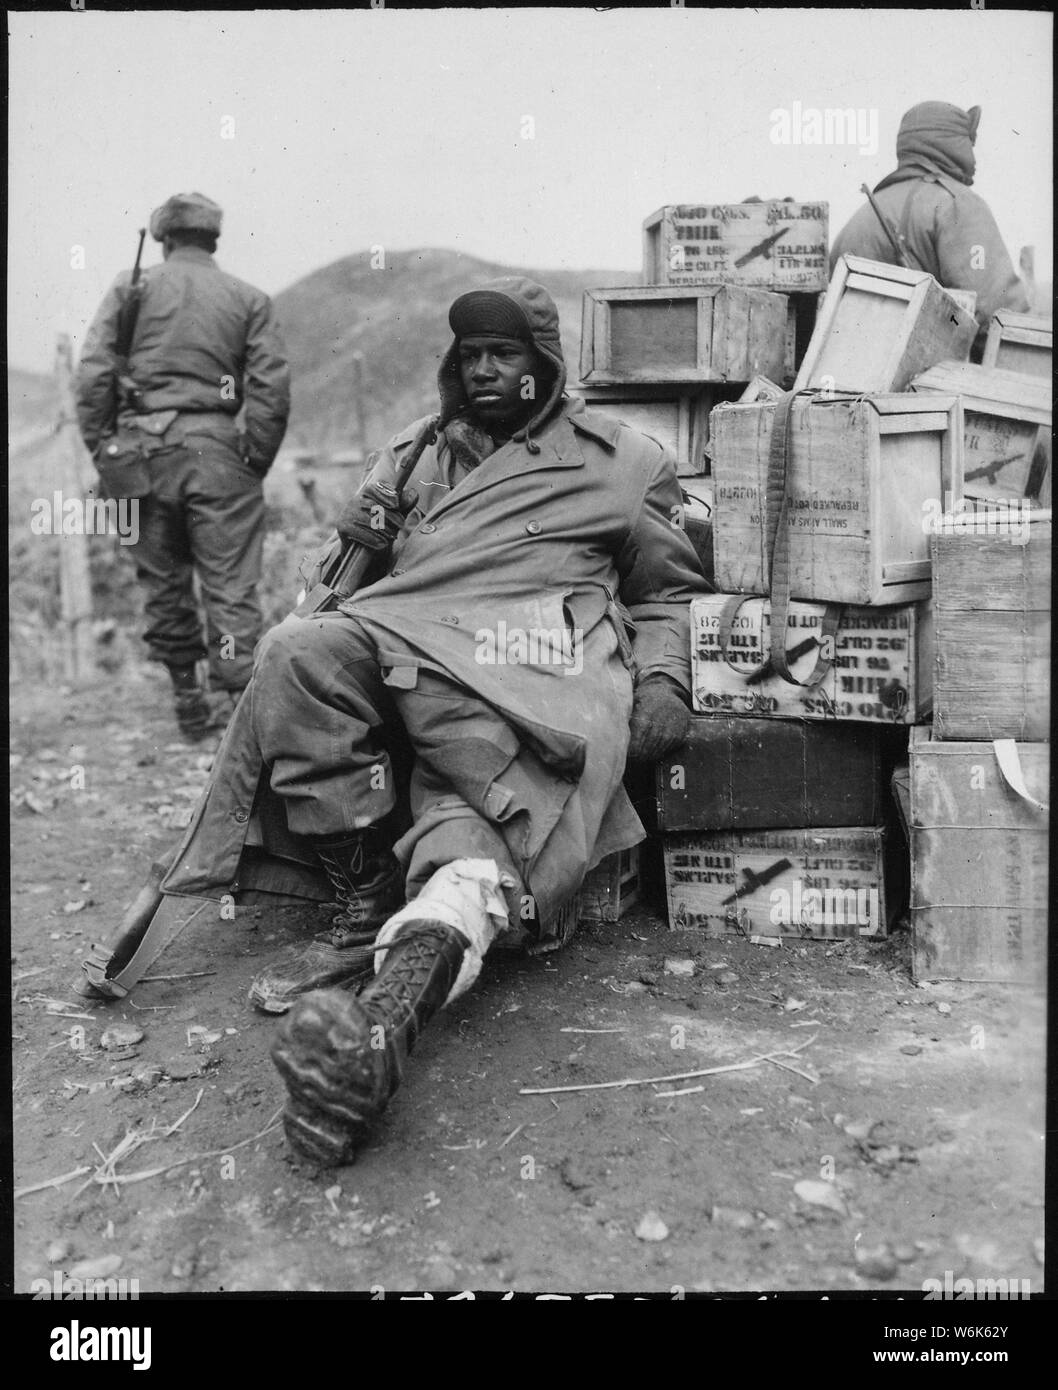 Private First Class Edward Wilson, 24th Infantry Regiment, wounded in leg while engaged in action against the enemy forces near the front lines in Korea, waits to be evacuated to aid station behind the lines.; General notes:  Use War and Conflict Number 1394 when ordering a reproduction or requesting information about this image. Stock Photo